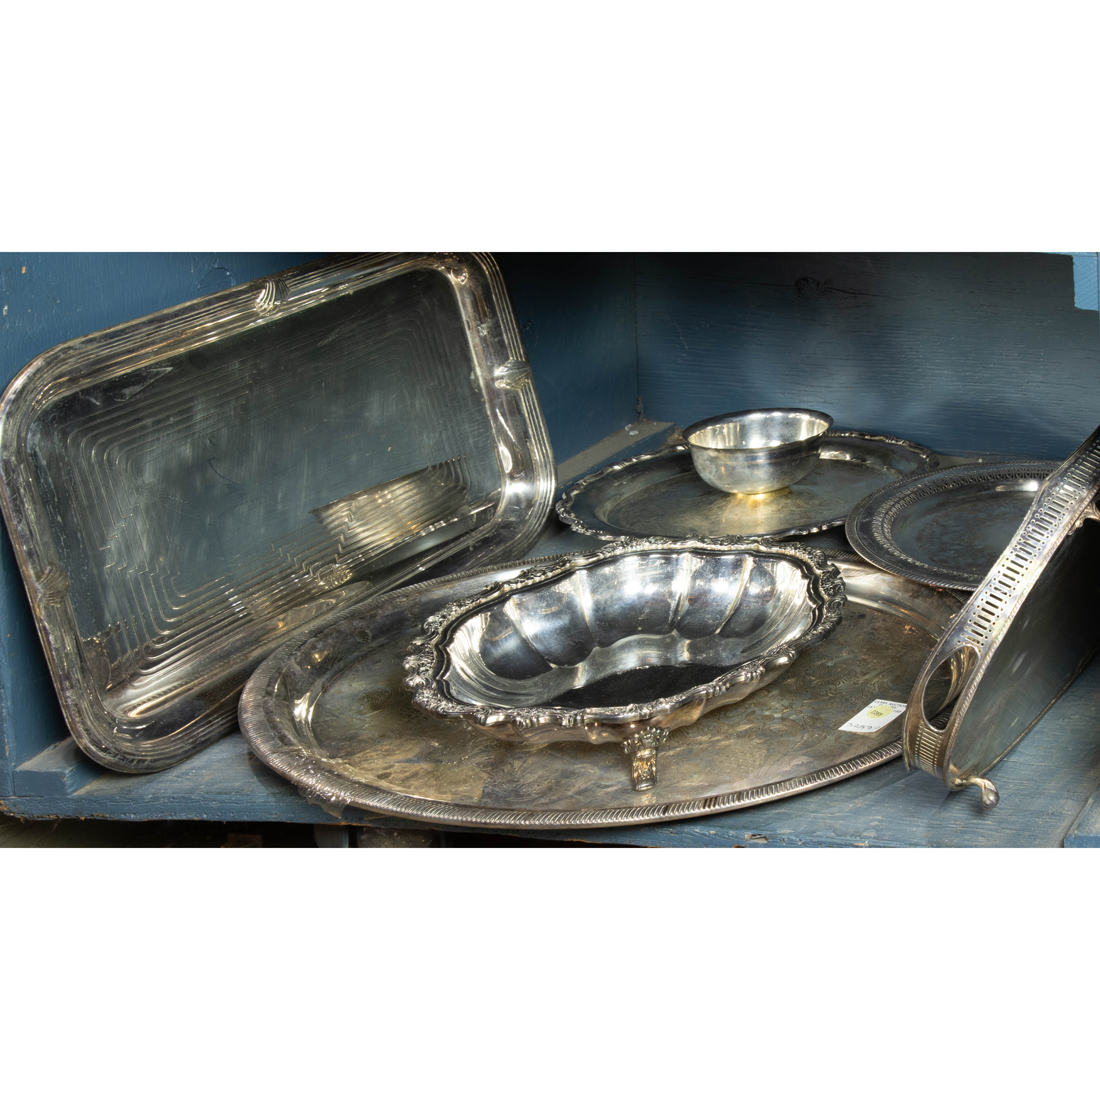 ONE BIN OF SILVER PLATE SERVING 3a2404